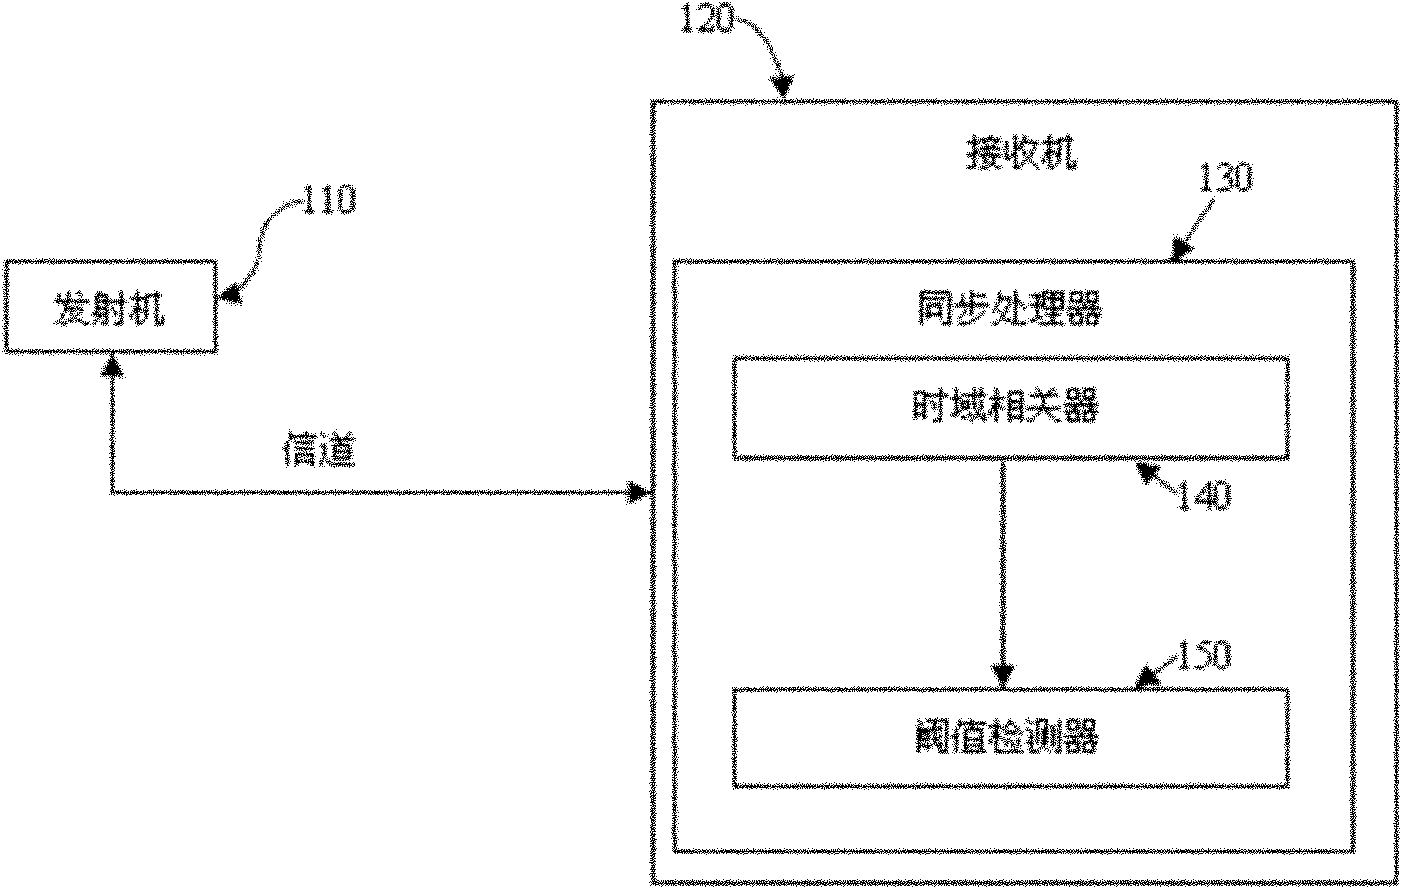 Frame synchronization method and device applicable to burst communication system